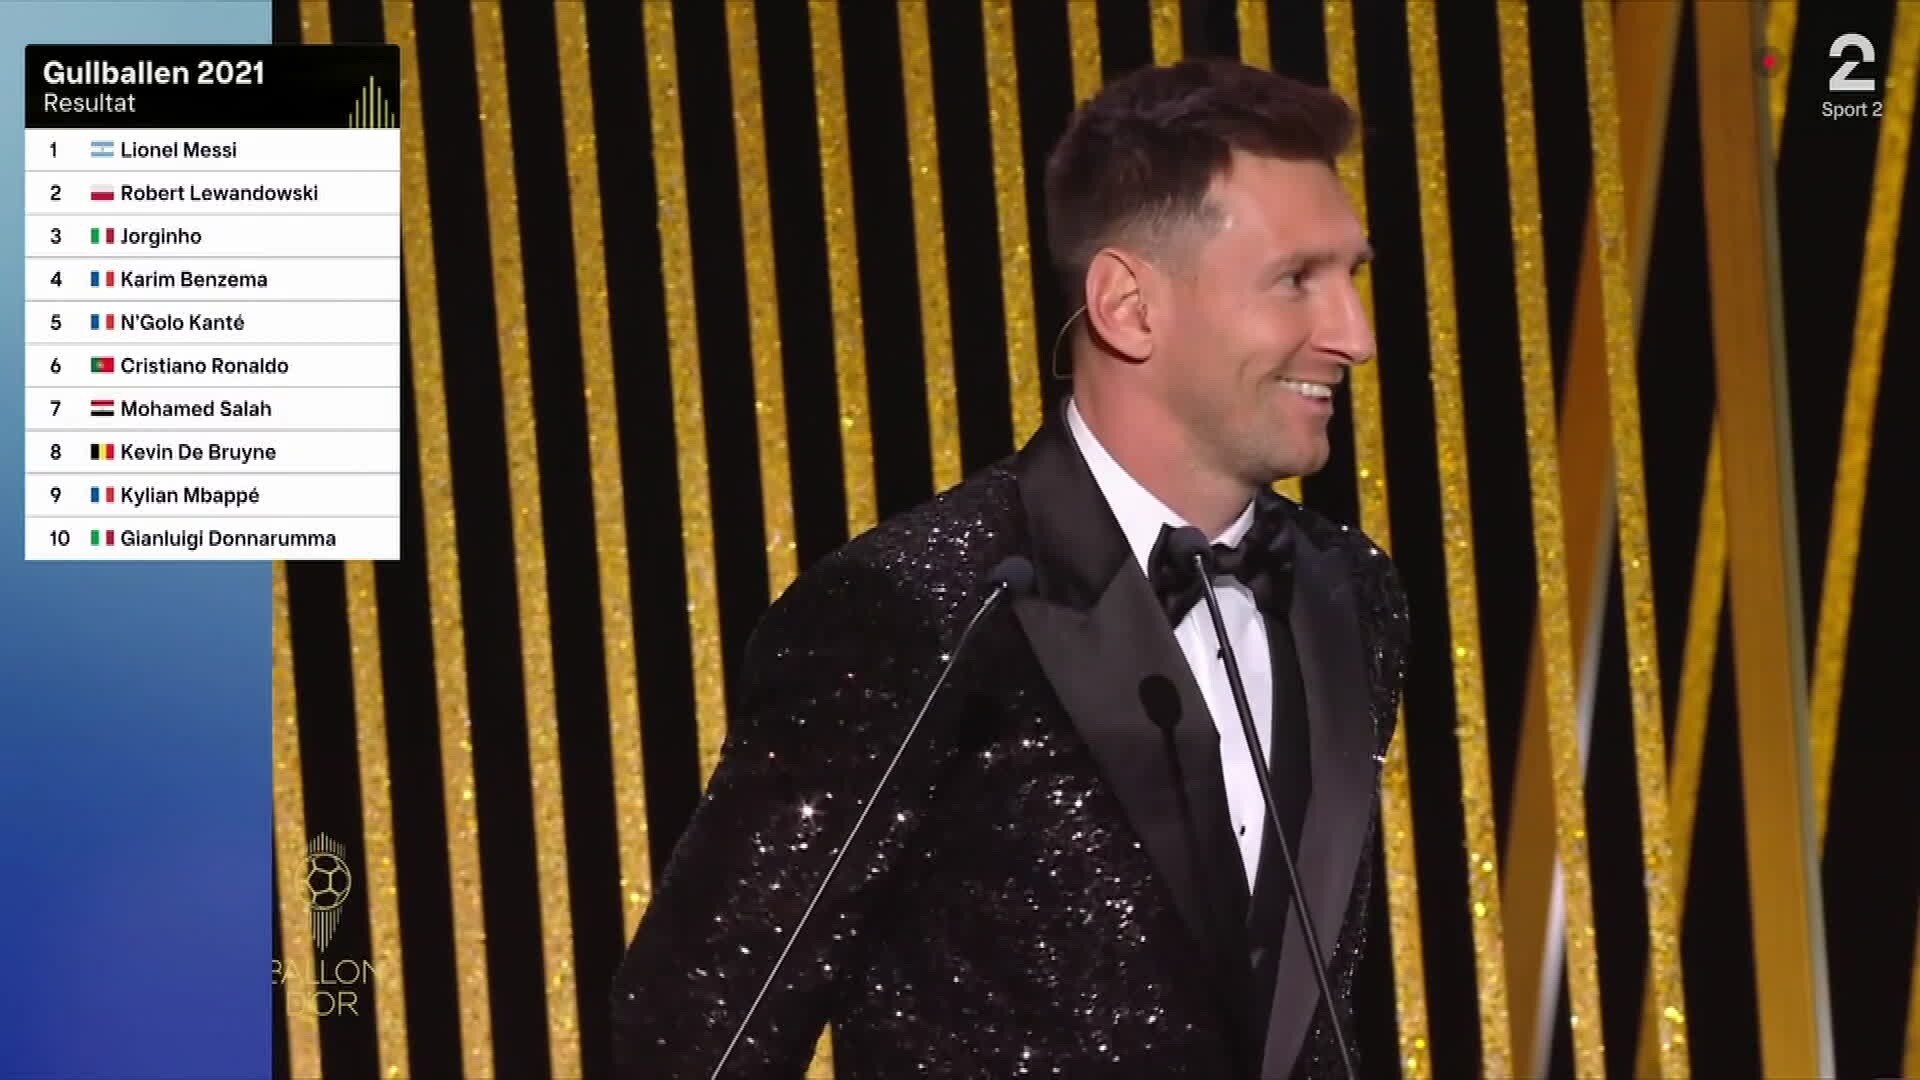 Messi receives the Golden Ball for the seventh time – NRK Sport – Sports news, results and broadcast schedule